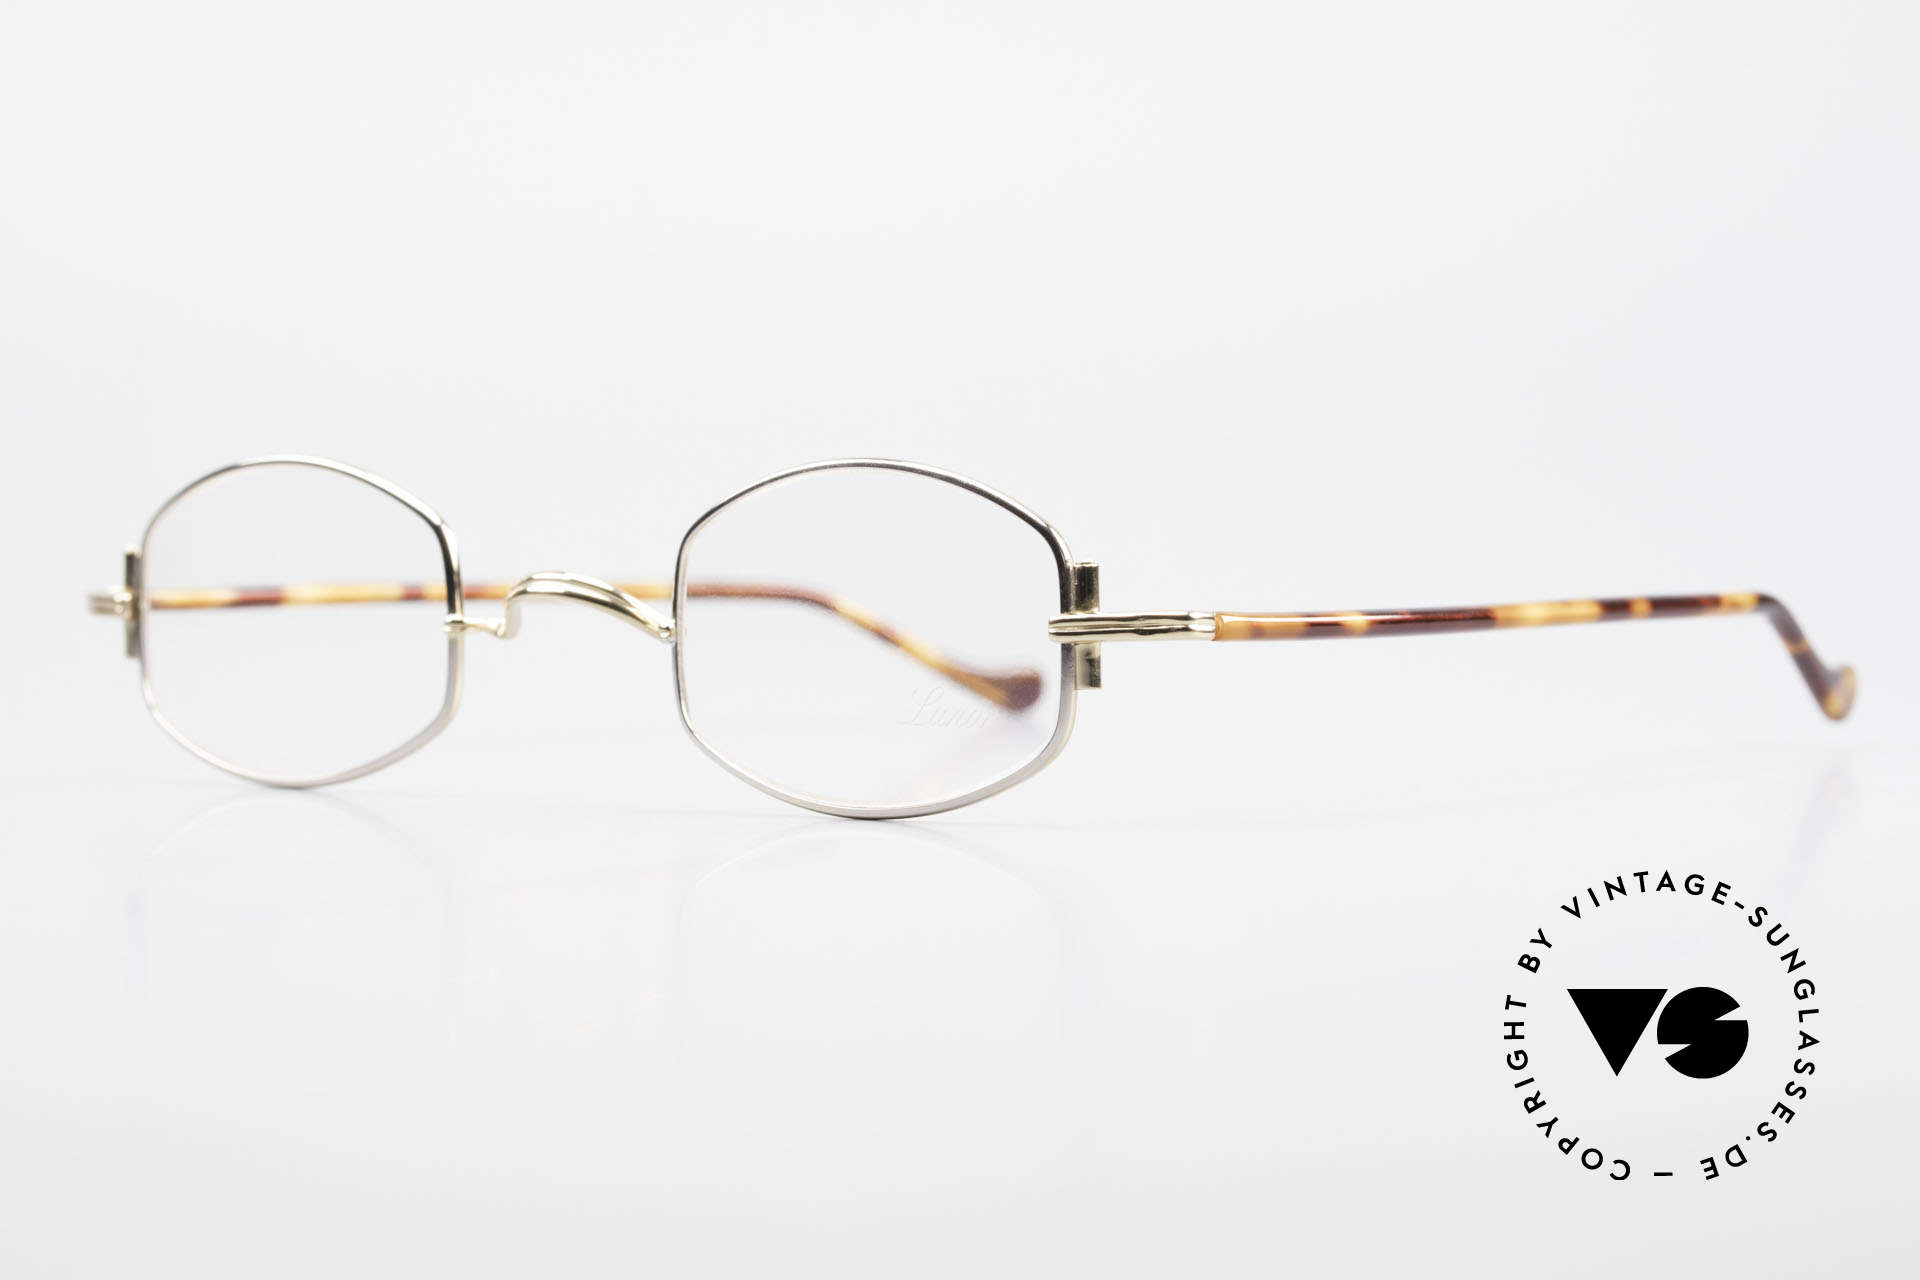 Lunor XA 03 Lunor Eyeglasses True Vintage, well-known for the "W-bridge" & the plain frame designs, Made for Men and Women